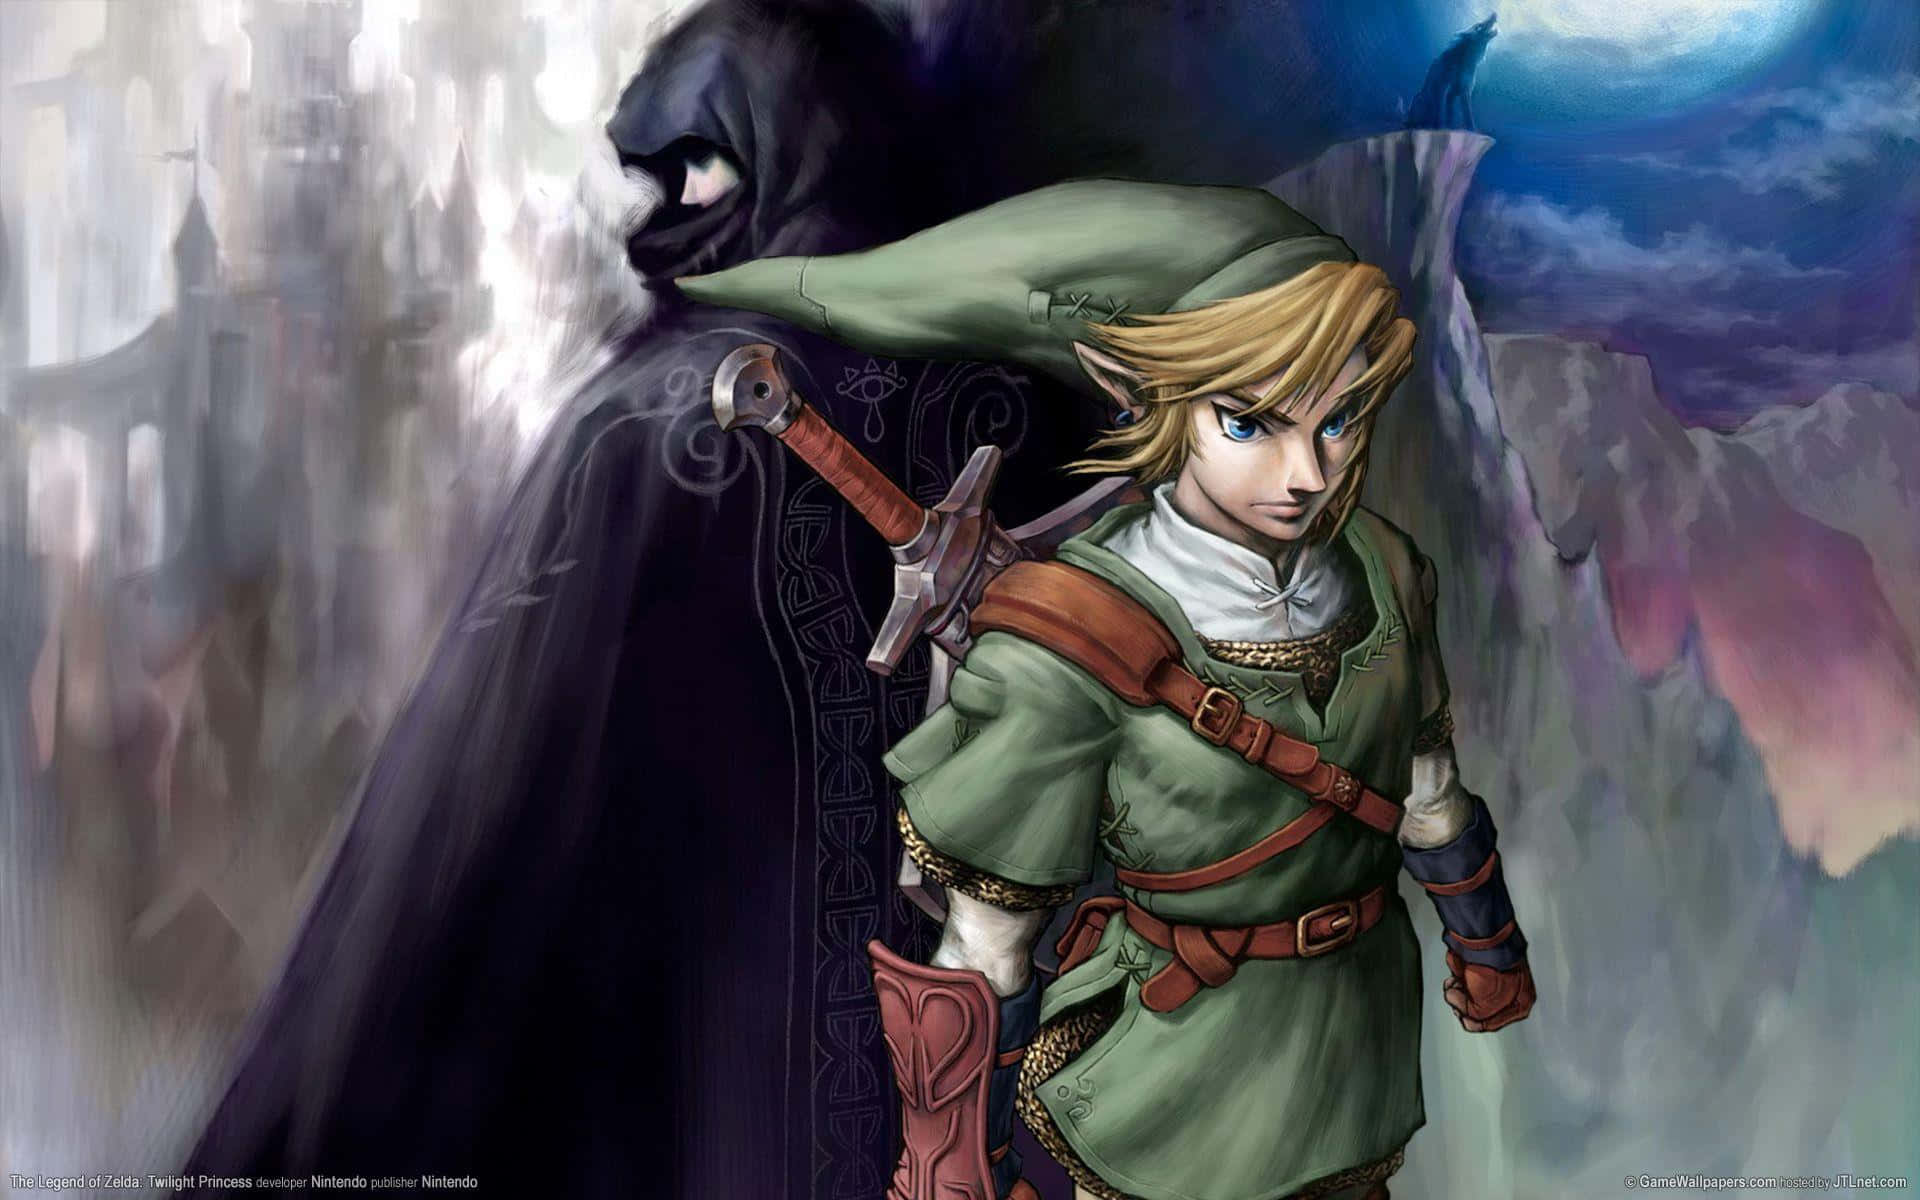 Explore The Mysterious World Of Hyrule In The Legend Of Zelda: Twilight Princess Wallpaper